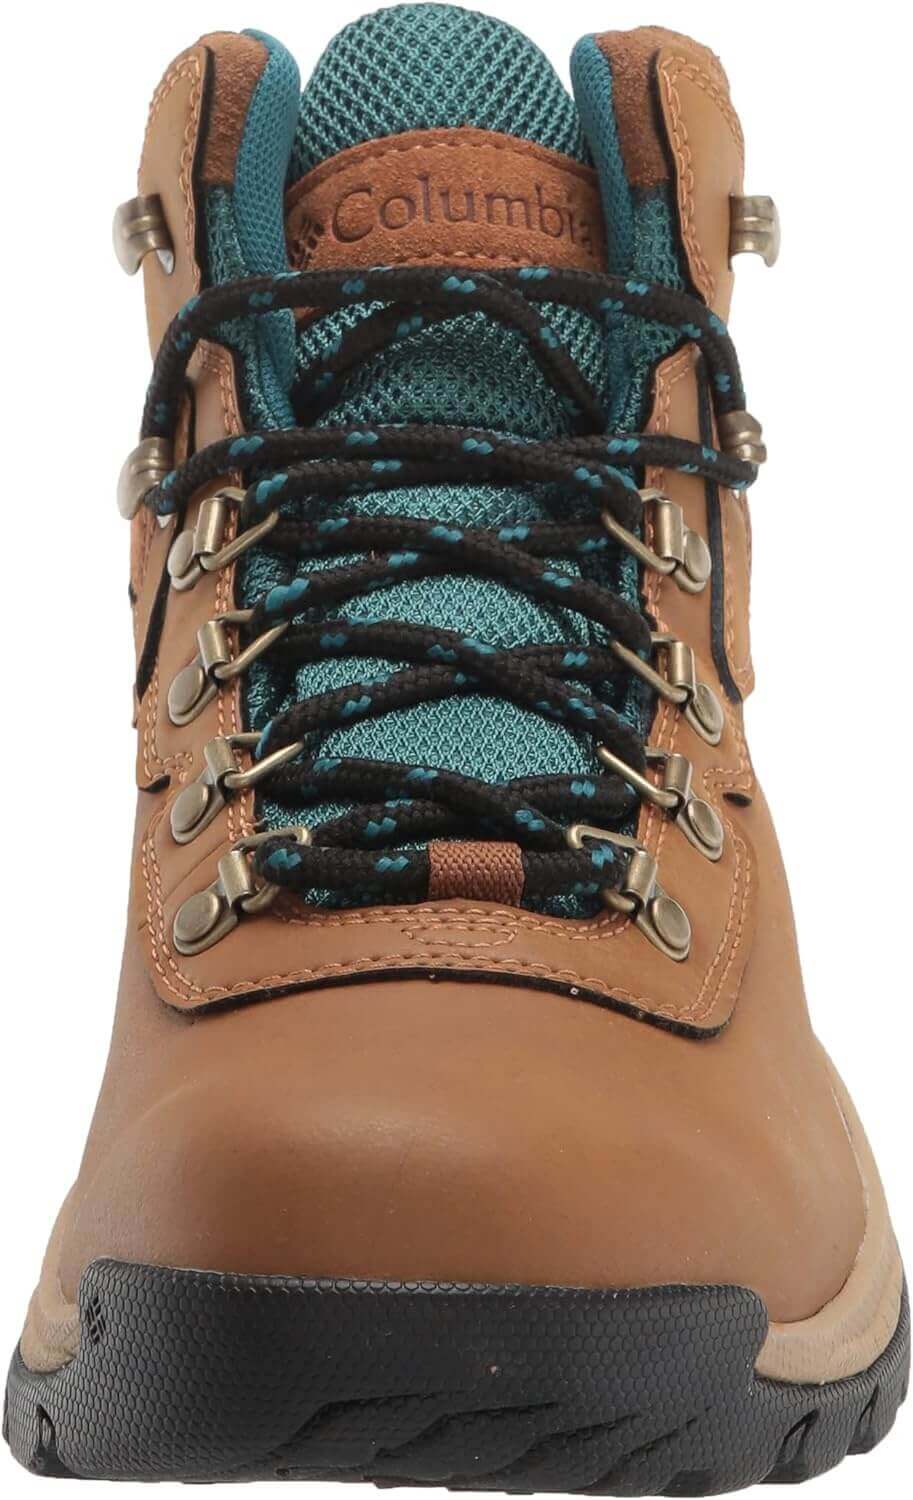 Shop The Latest >Columbia Women's Newton Ridge Waterproof Hiking Boot > *Only $187.91*> From The Top Brand > *Columbial* > Shop Now and Get Free Shipping On Orders Over $45.00 >*Shop Earth Foot*